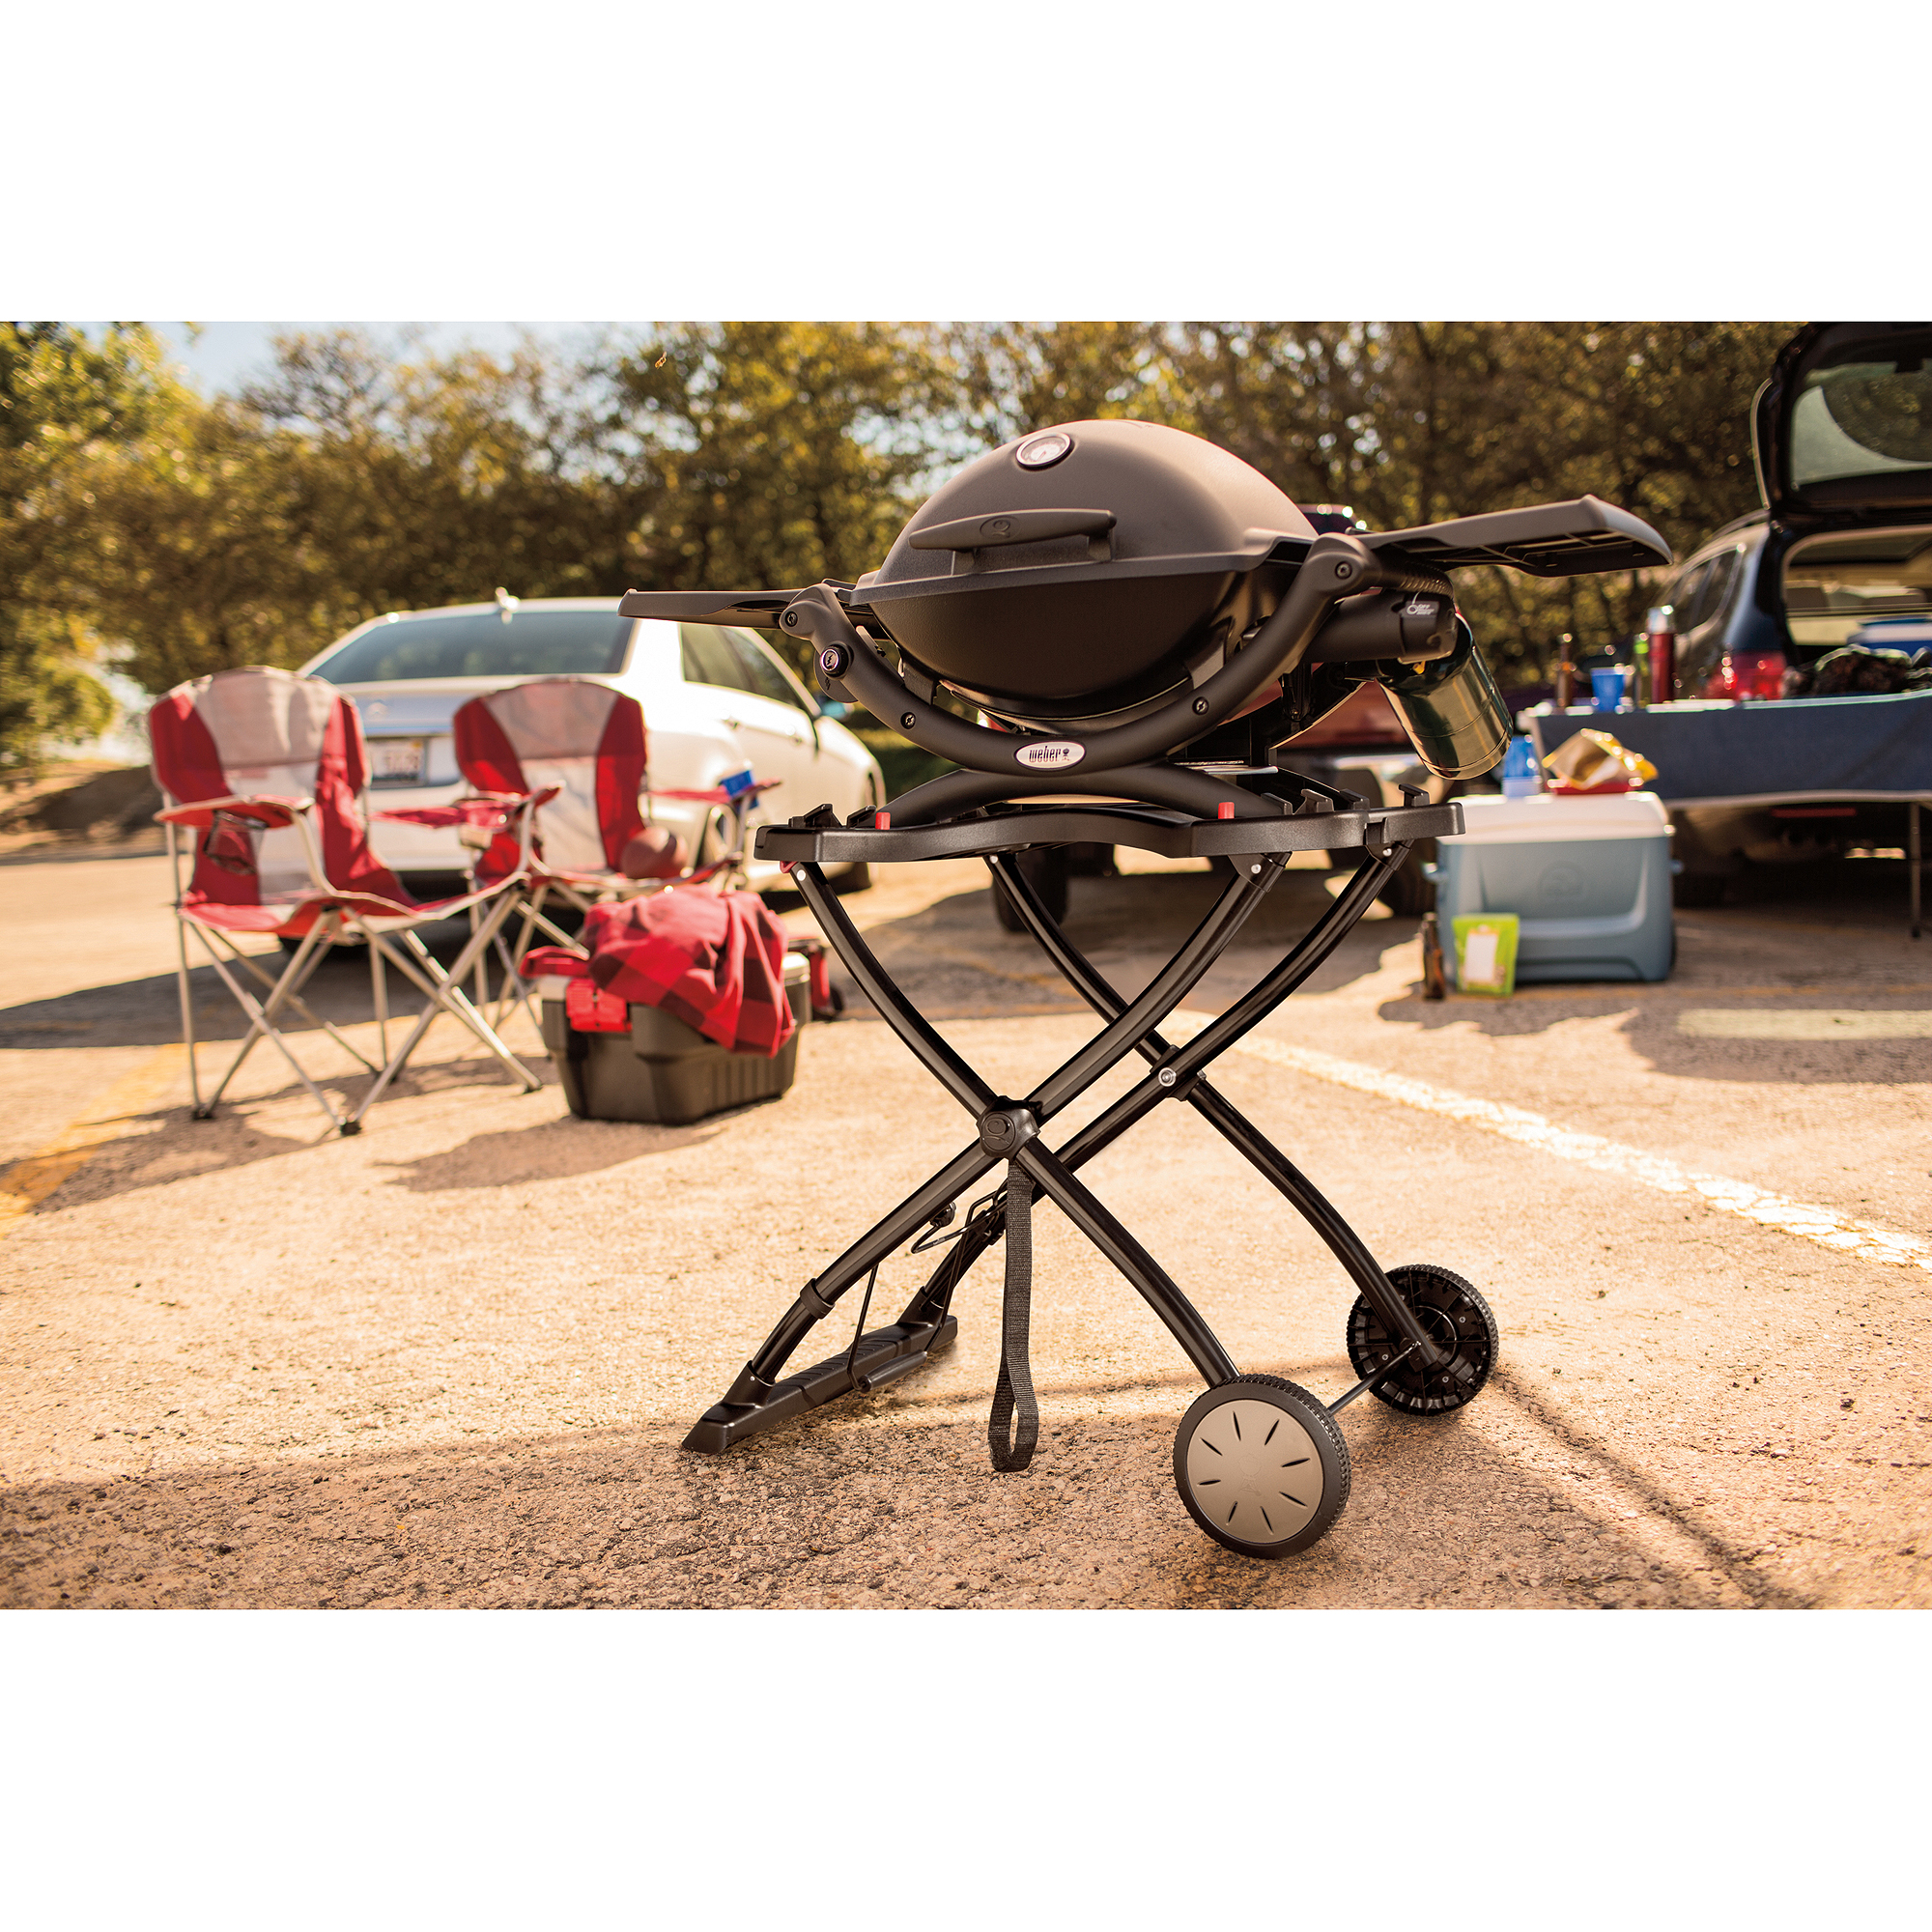 Weber Q-1200 Portable Gas Grill - image 3 of 3